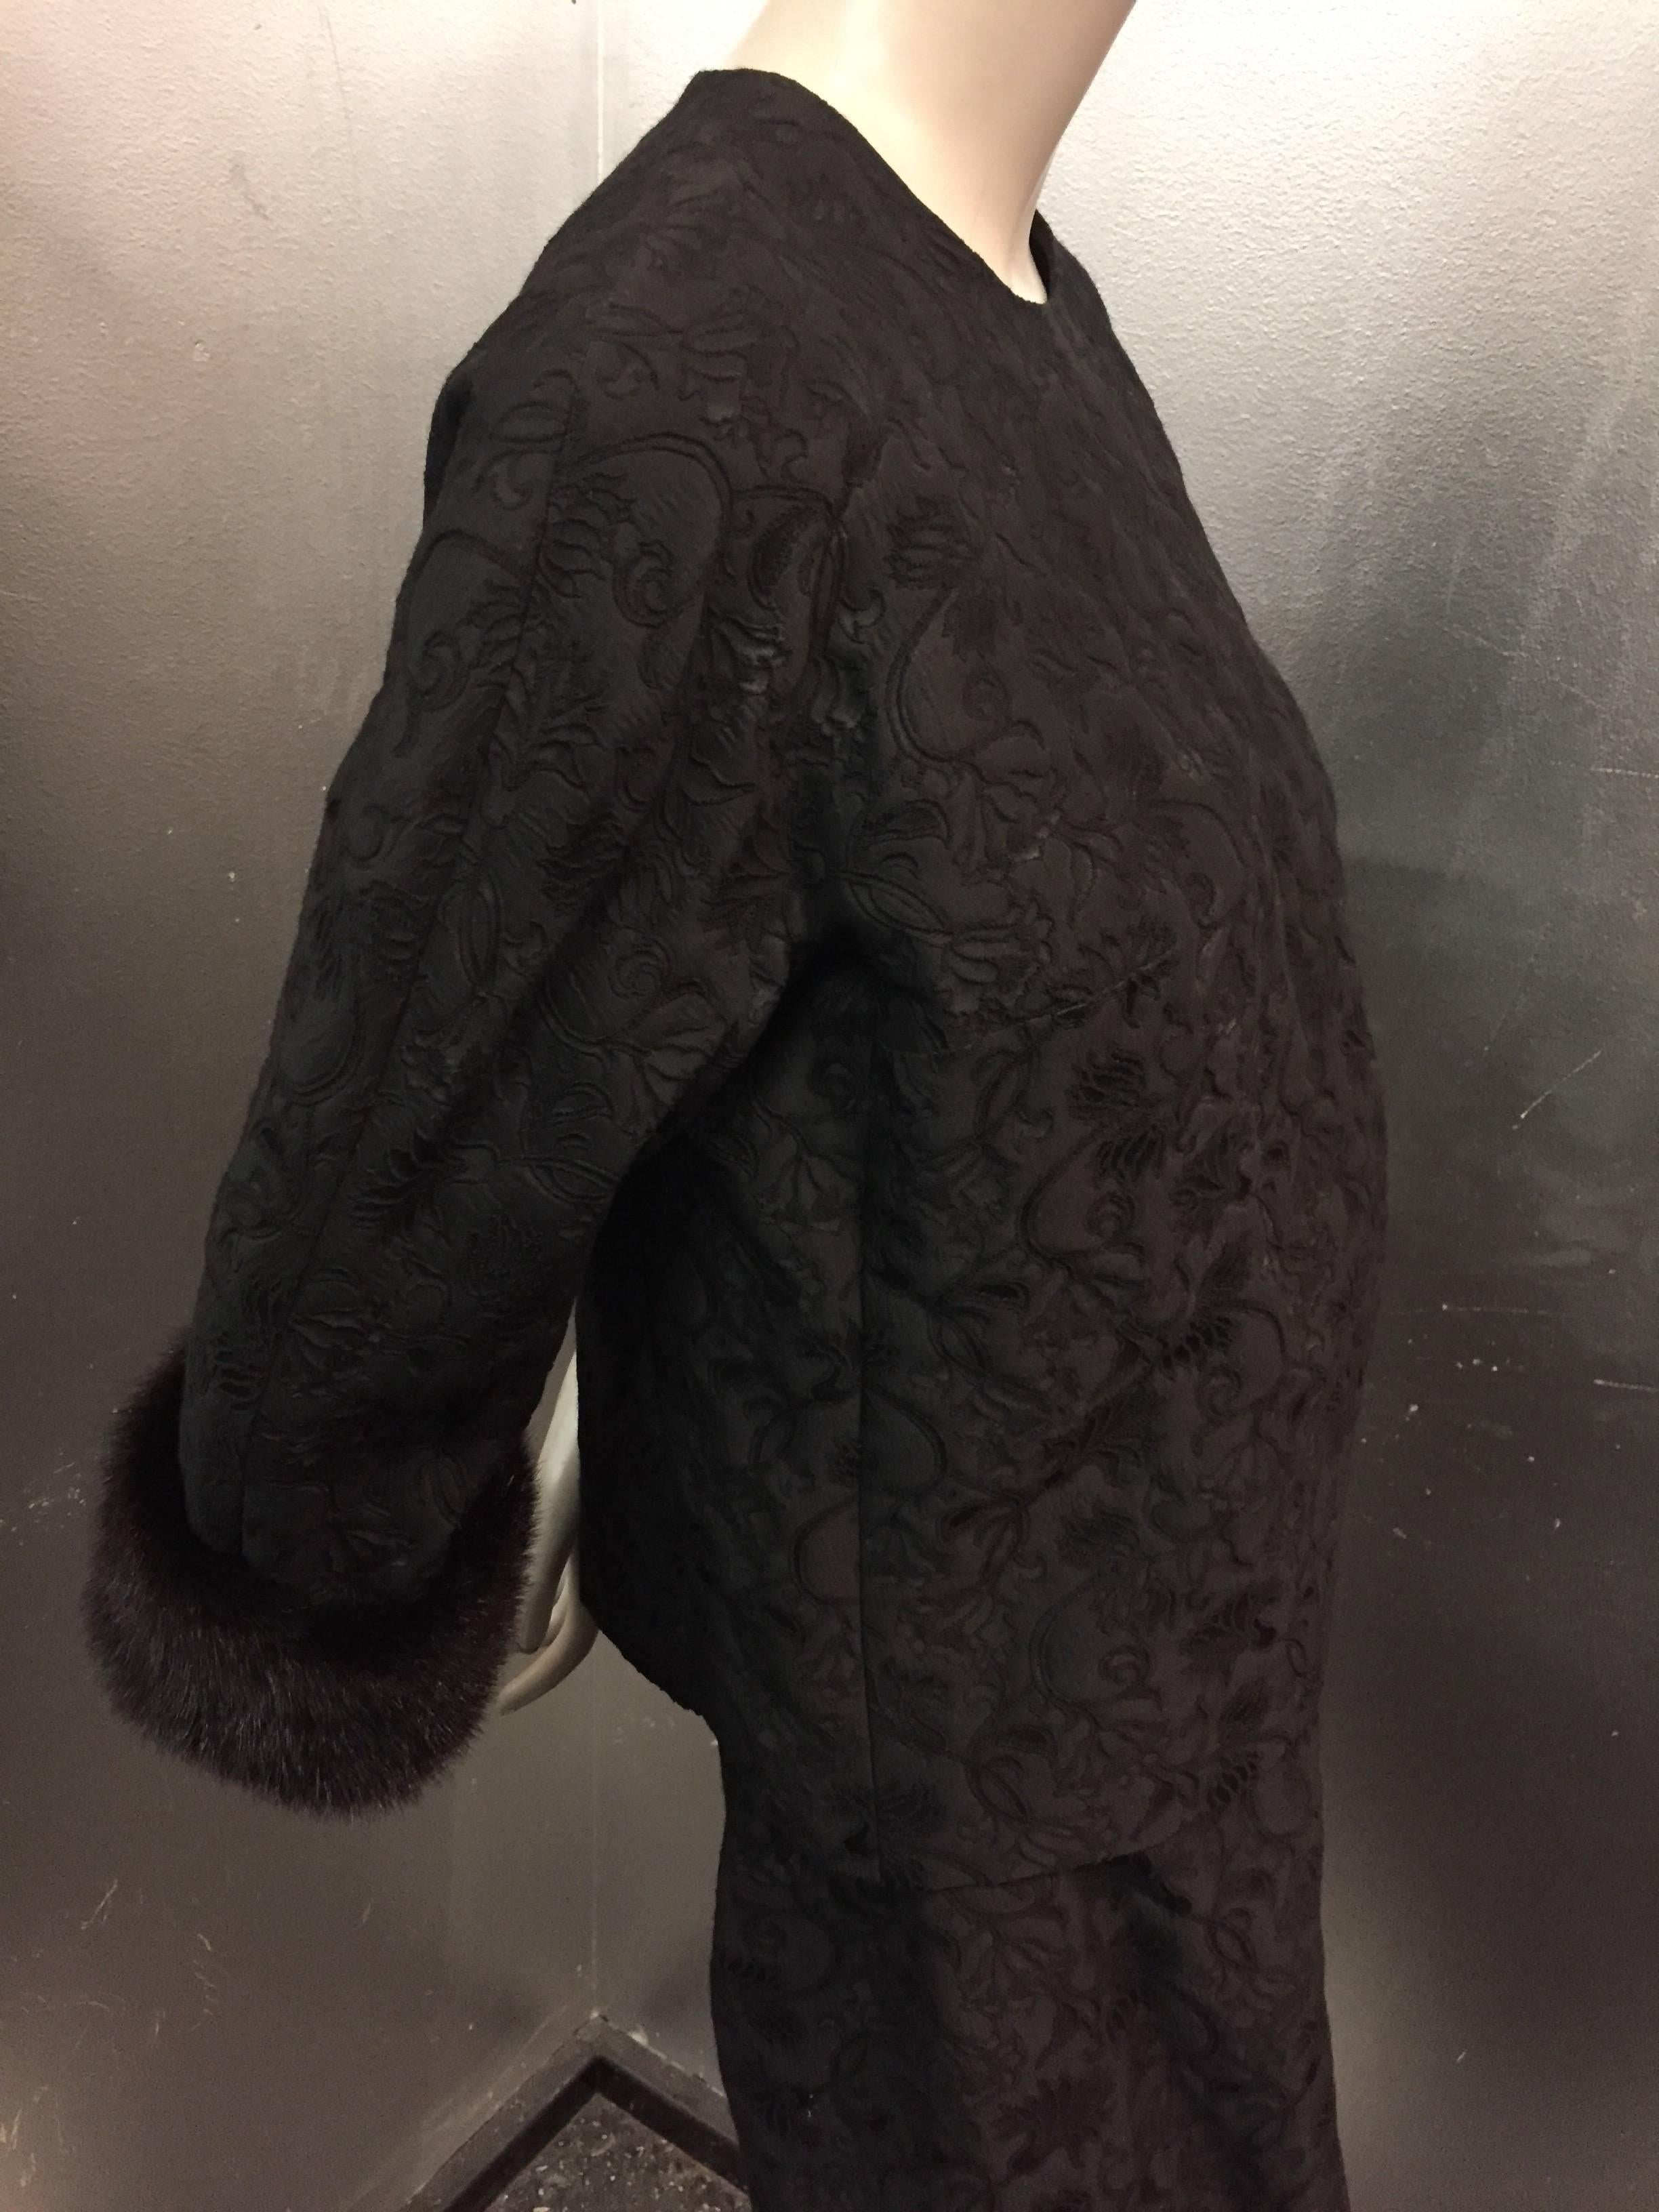 1960s Saks Fifth Avenue black silk brocade 2-piece evening column:  Long narrow skirt with gathered waist. Top is a boxy-fit jacket that buttons down the back with fur cuffs. Gorgeous.